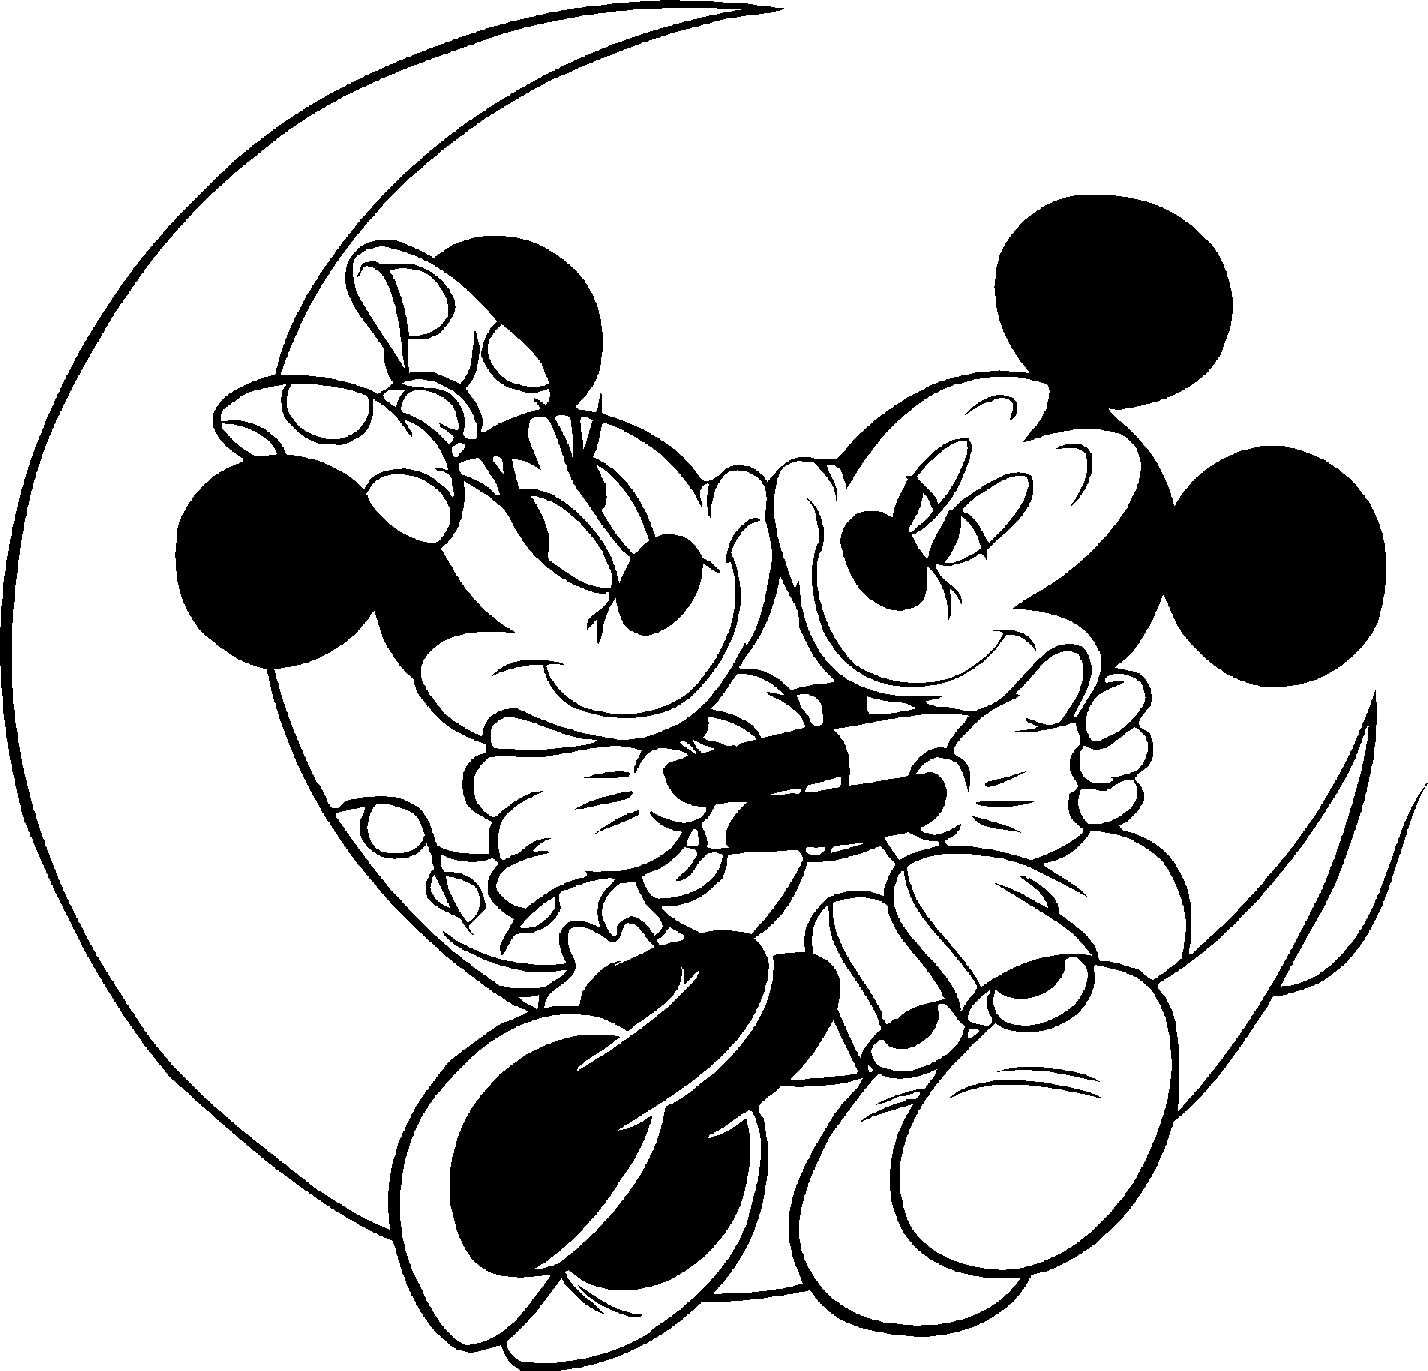 mickey mouse coloring page ausmalbilder für kinder malvorlagen und malbuch mickey mouse coloring mickey page 